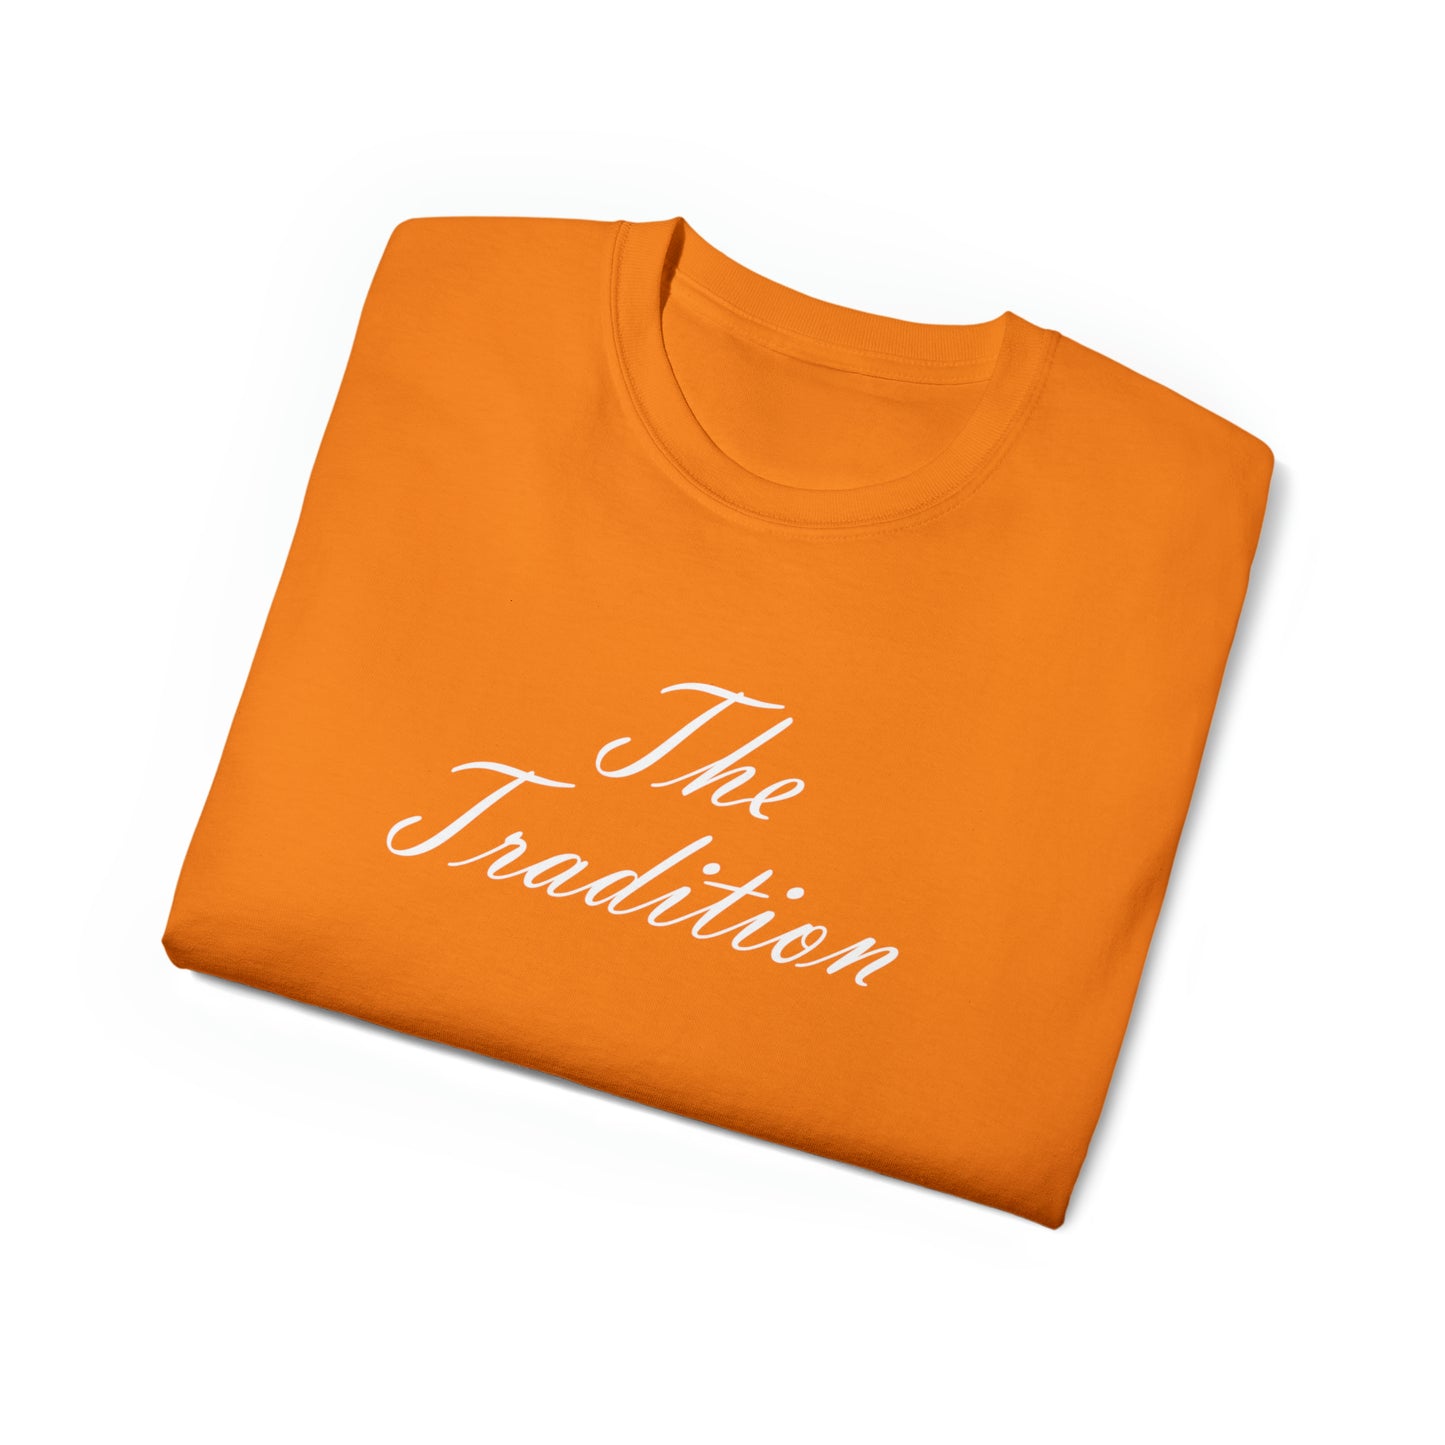 The Tradition T-Shirt